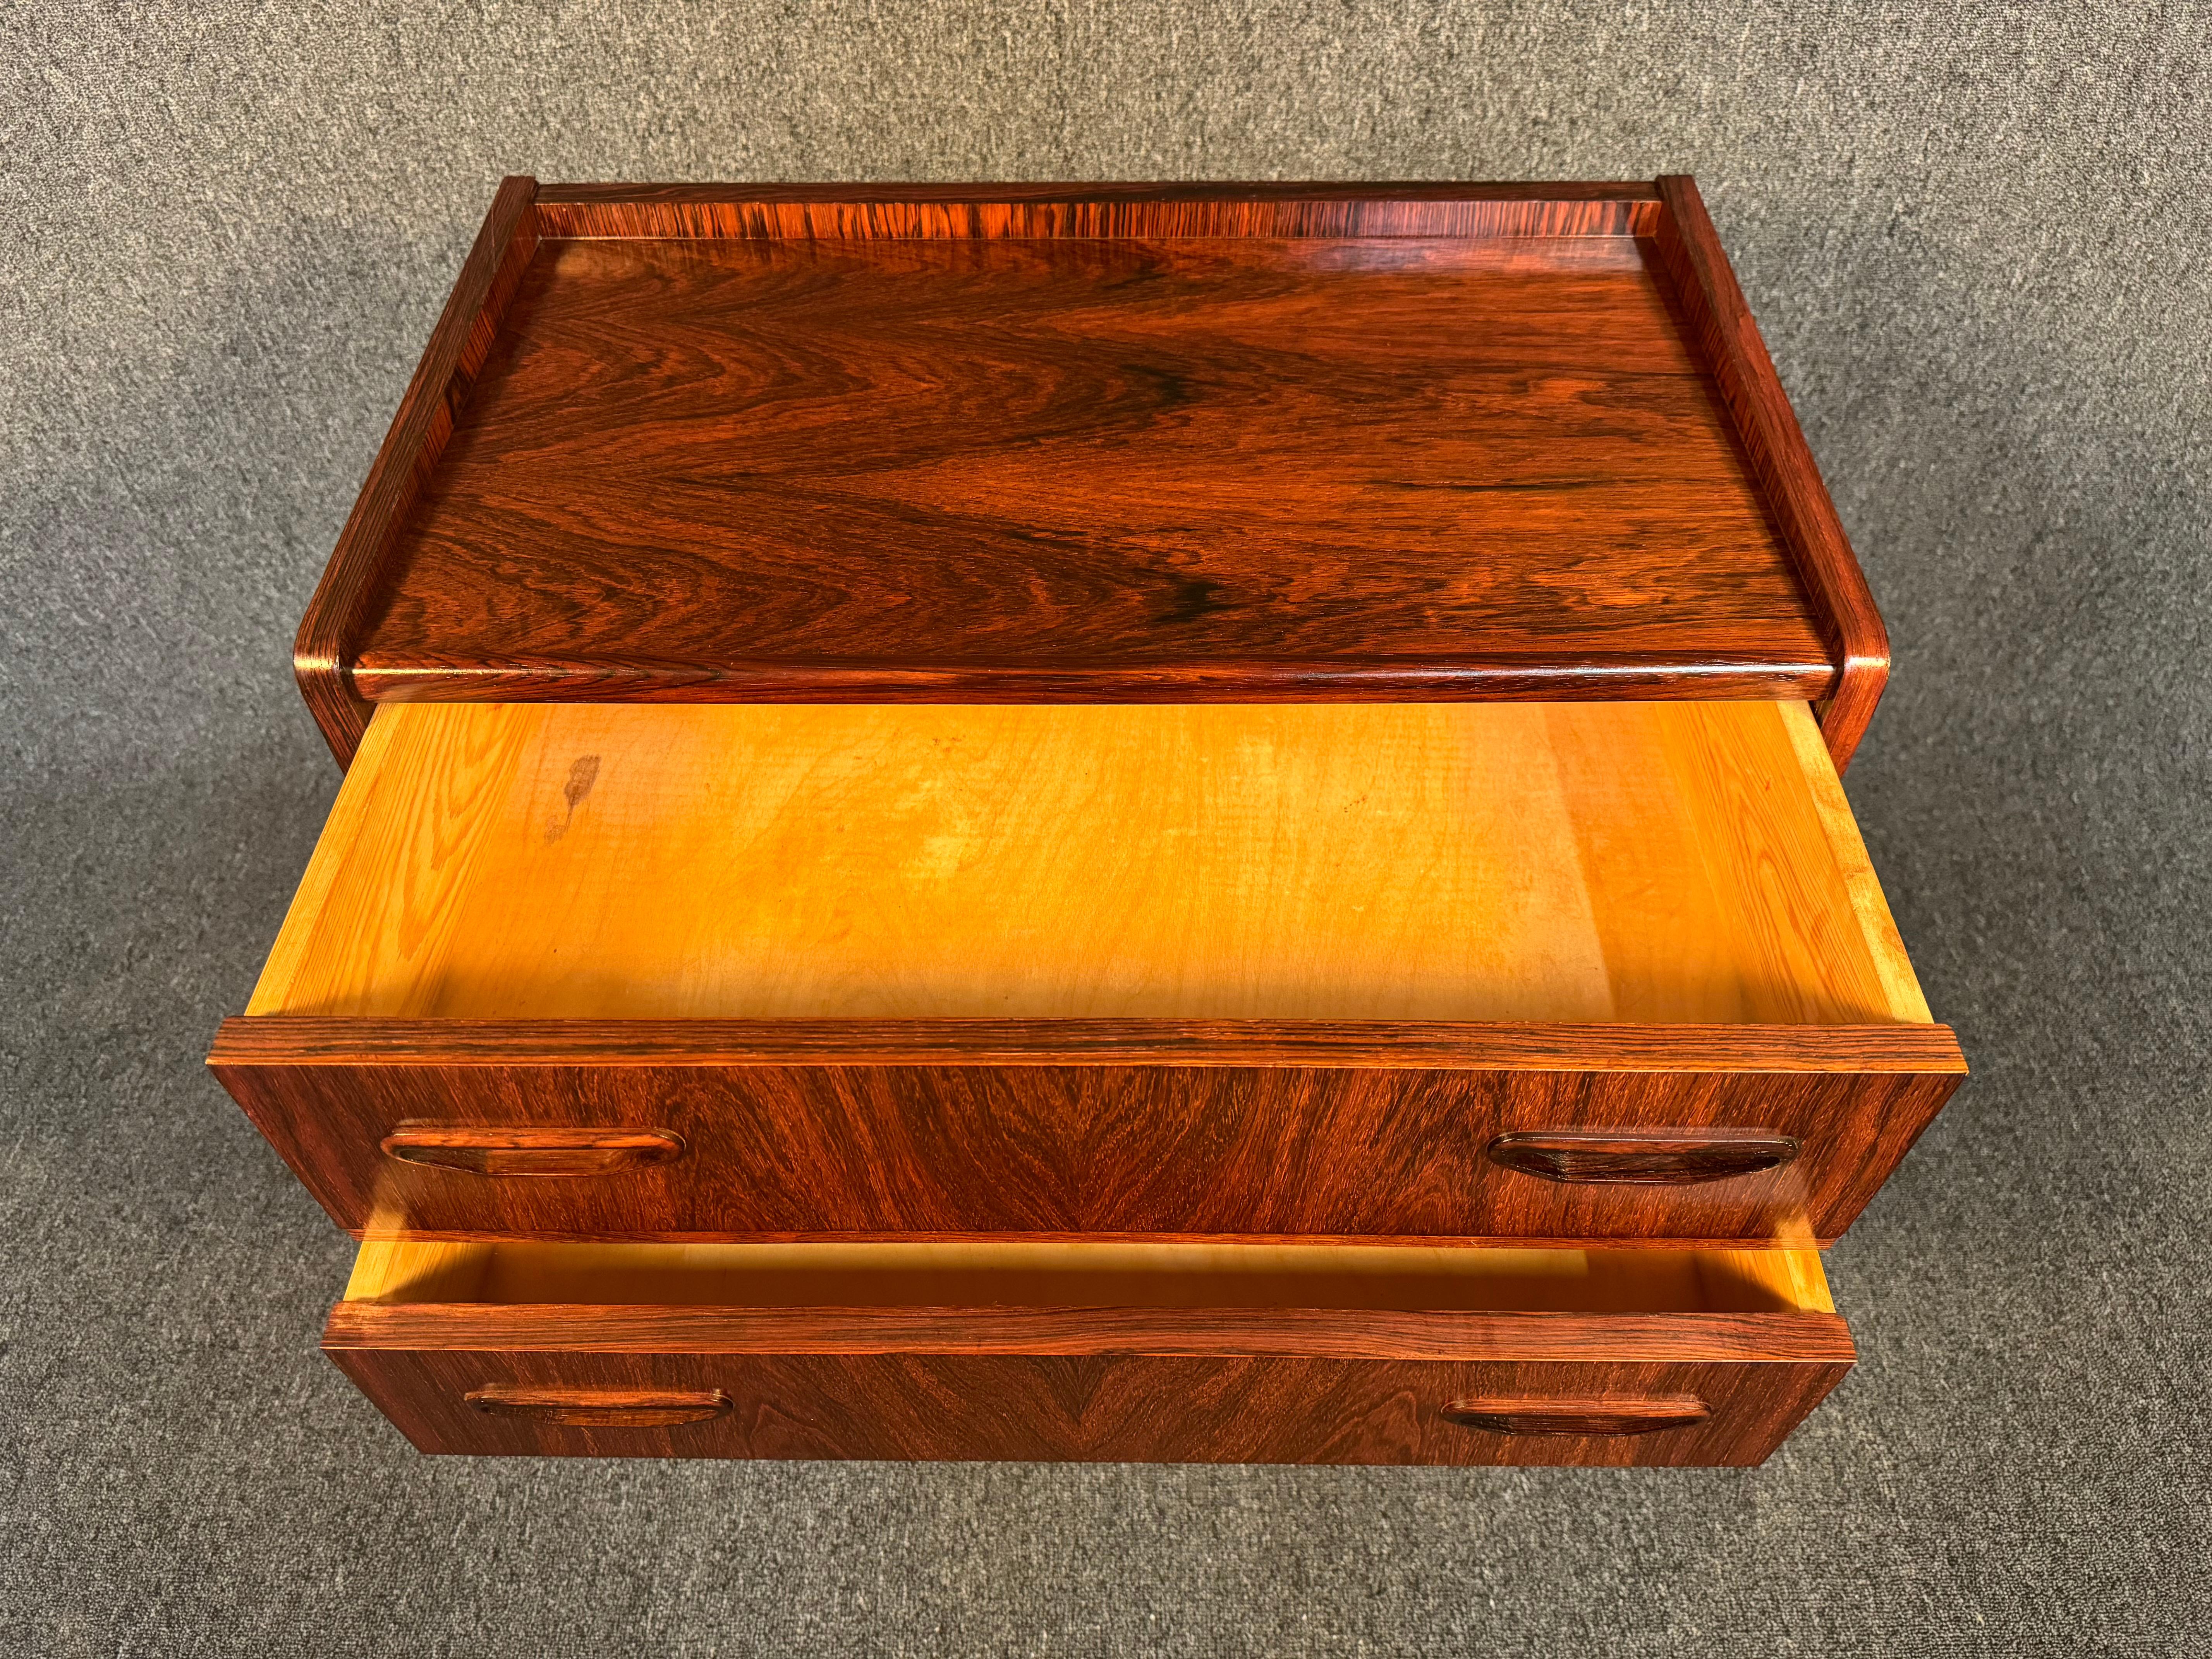 Vintage Danish Mid Century Modern Rosewood Nightstand - Entry Chest In Good Condition For Sale In San Marcos, CA